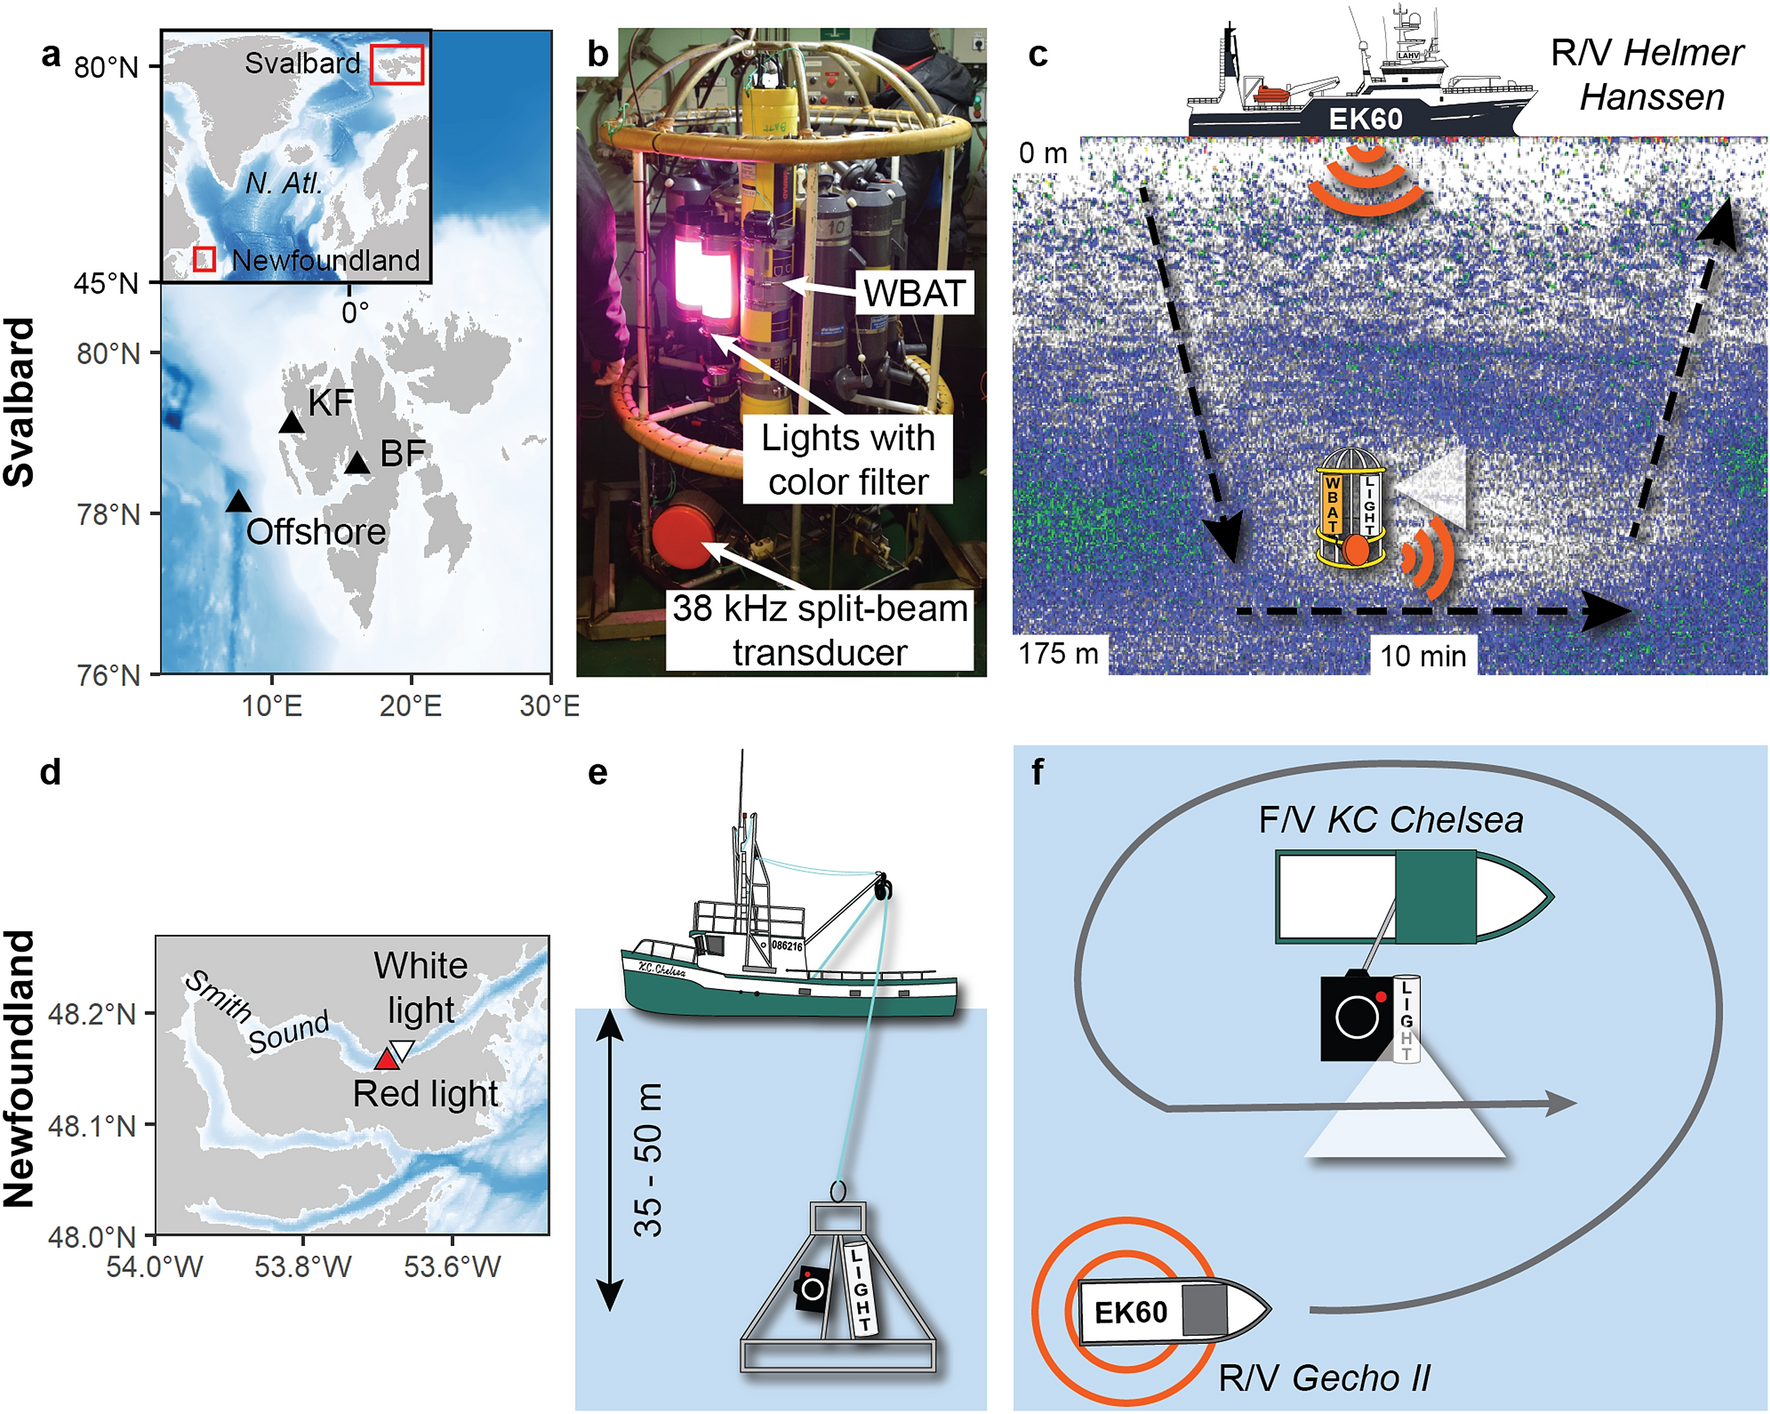 Pelagic organisms avoid white, blue, and red artificial light from  scientific instruments